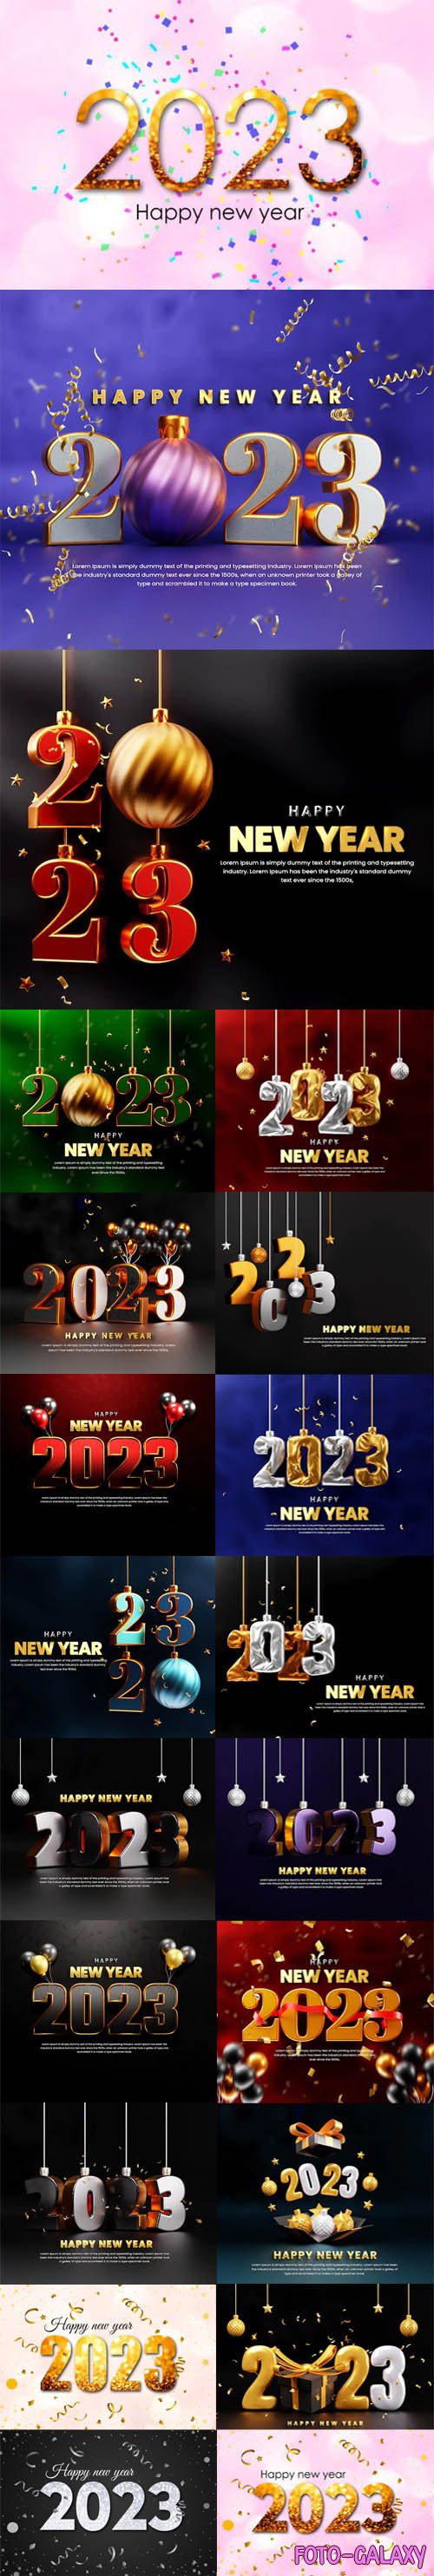 Happy New Year 2023 - Realistic Creative 3D Backgrounds PSD Templates